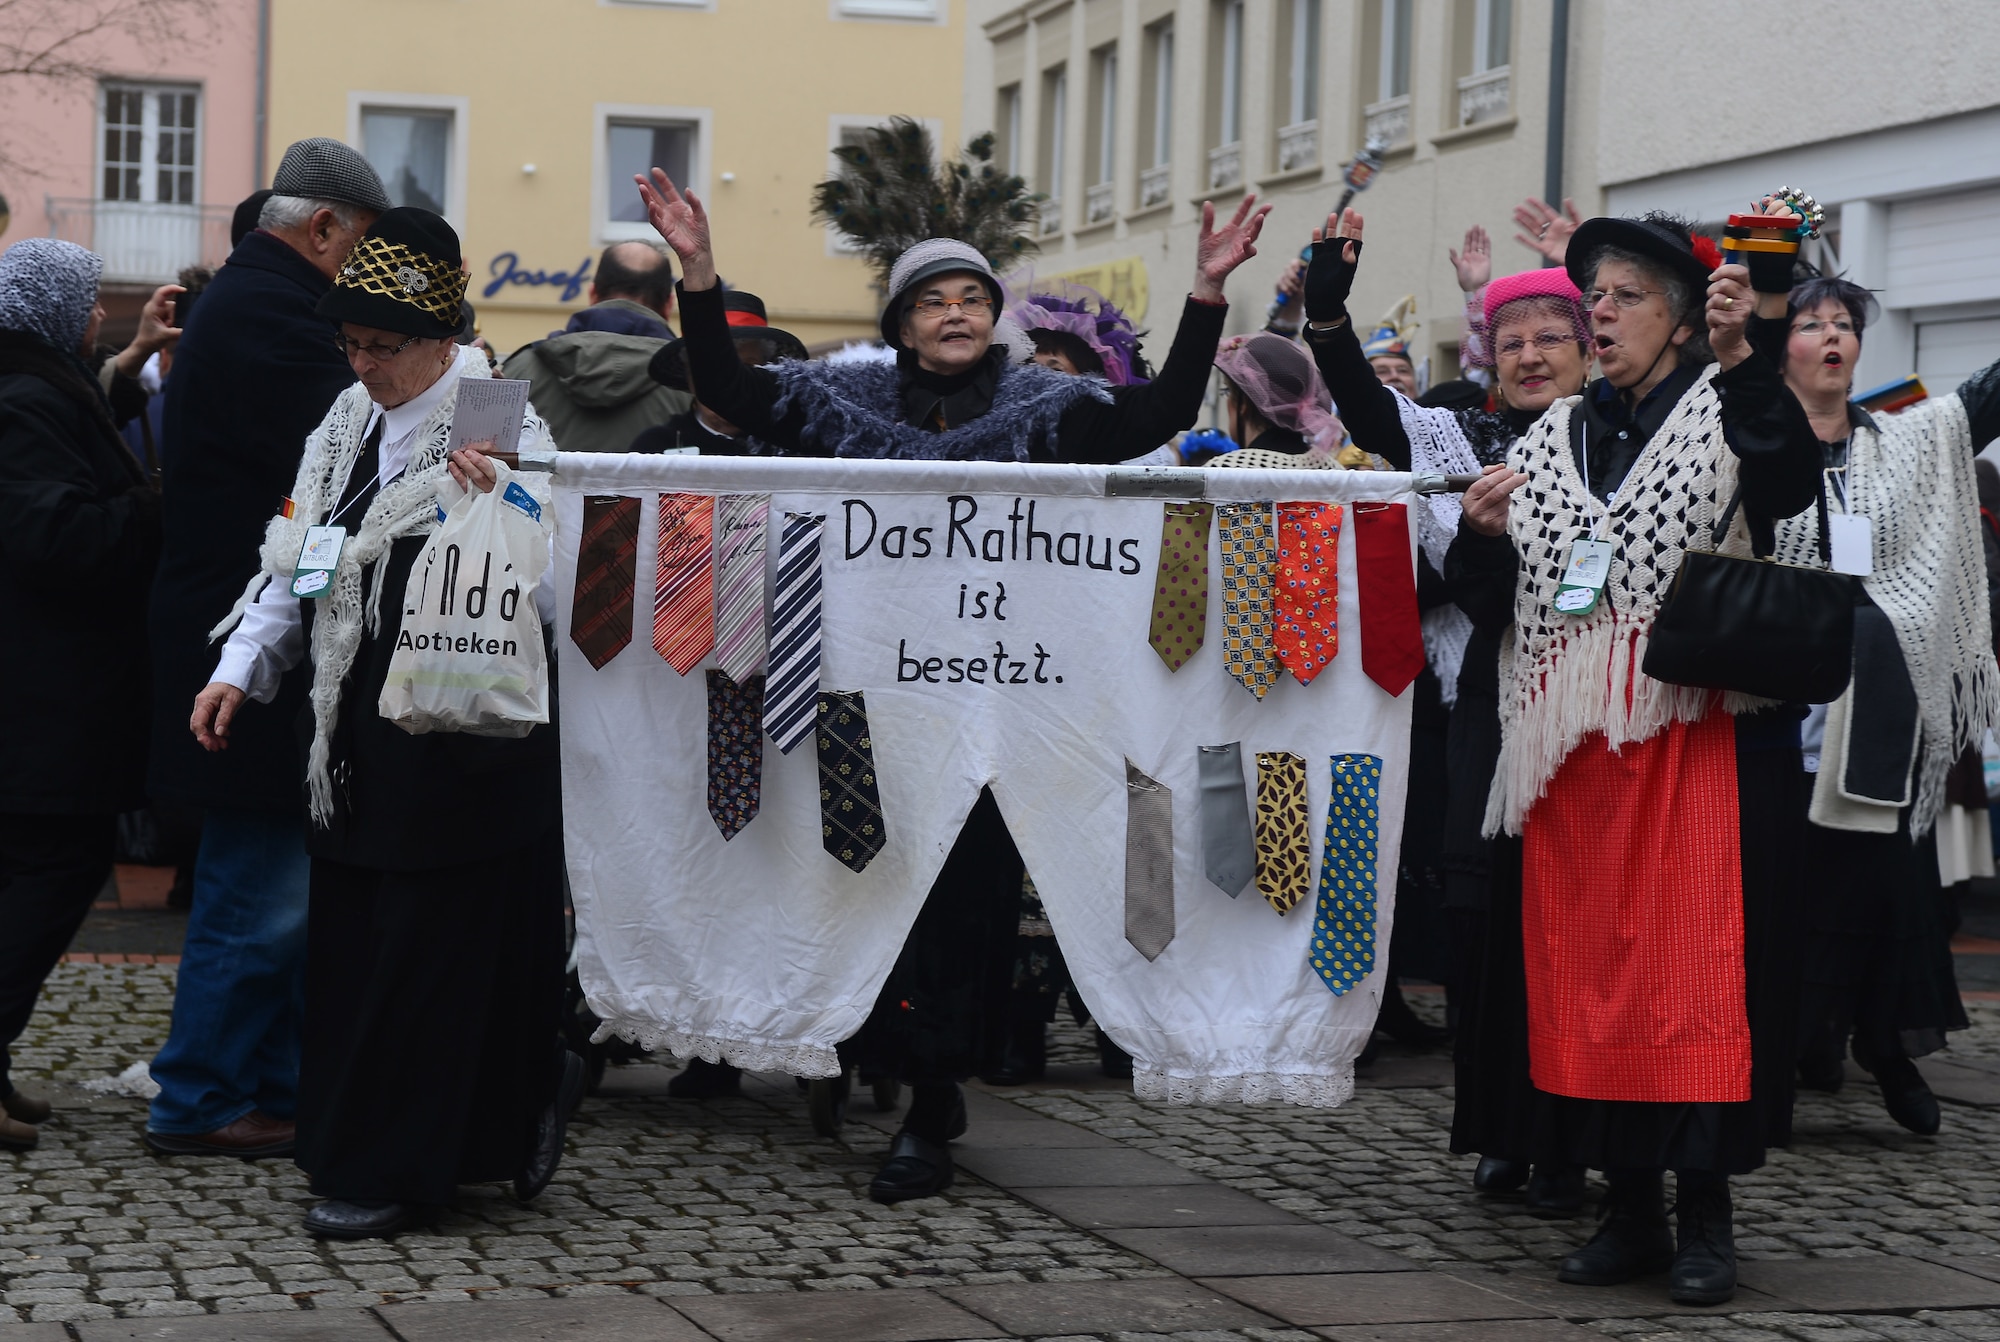 Female citizens of Bitburg, Germany, march into the city square during the 2015 Storming of the Rathaus Fasching event in Bitburg, Germany, Feb. 12, 2015. More than 250 people participated in the city’s Fasching celebration. (U.S. Air Force photo by Airman 1st Class Luke Kitterman/Released)